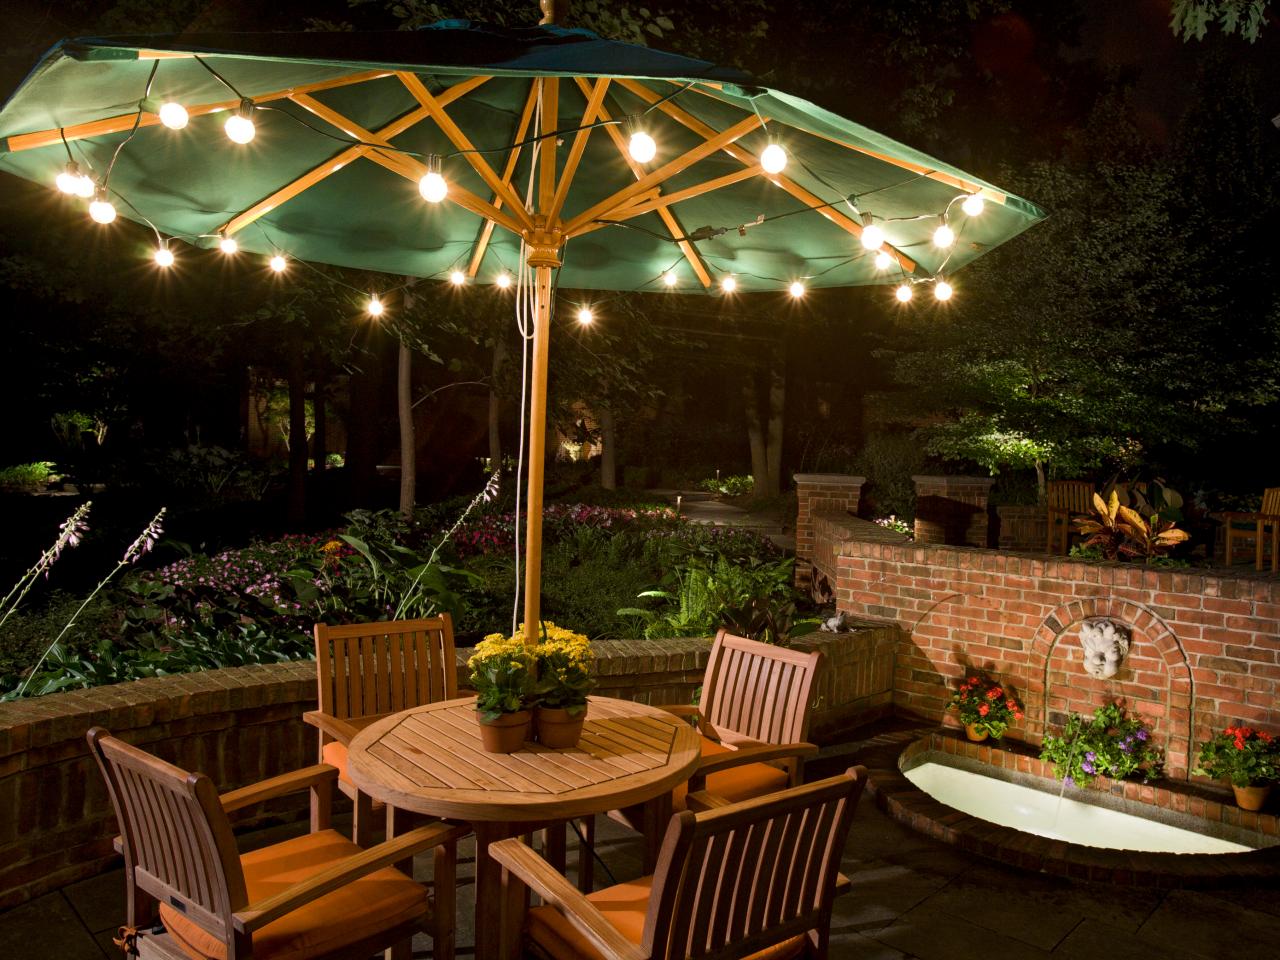 How To Light Up An Outdoor Patio